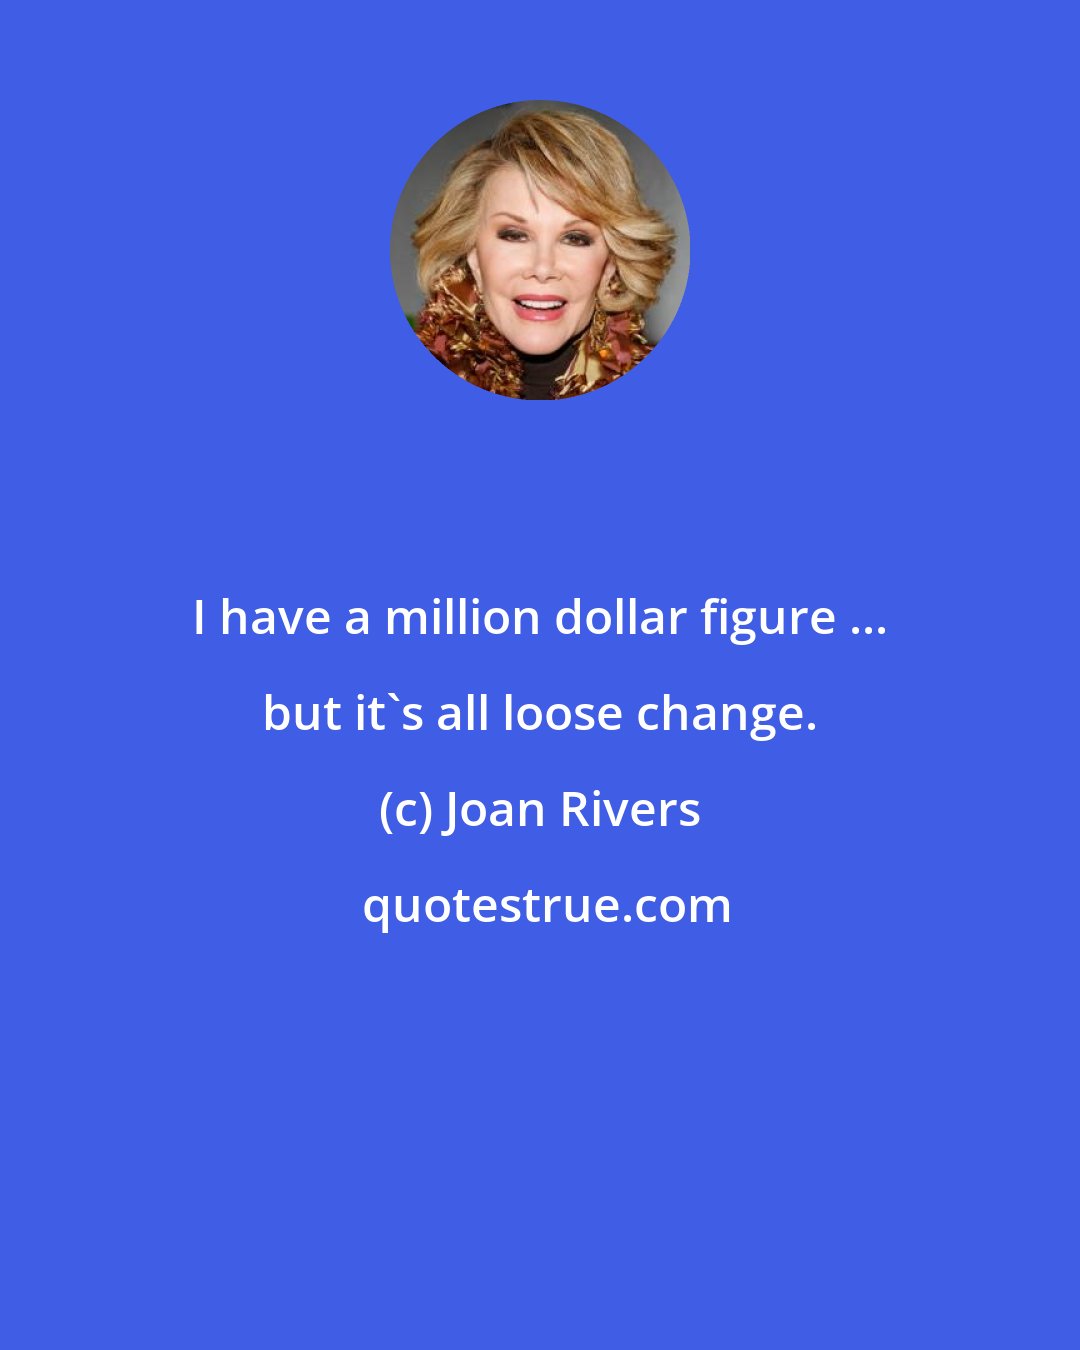 Joan Rivers: I have a million dollar figure ... but it's all loose change.